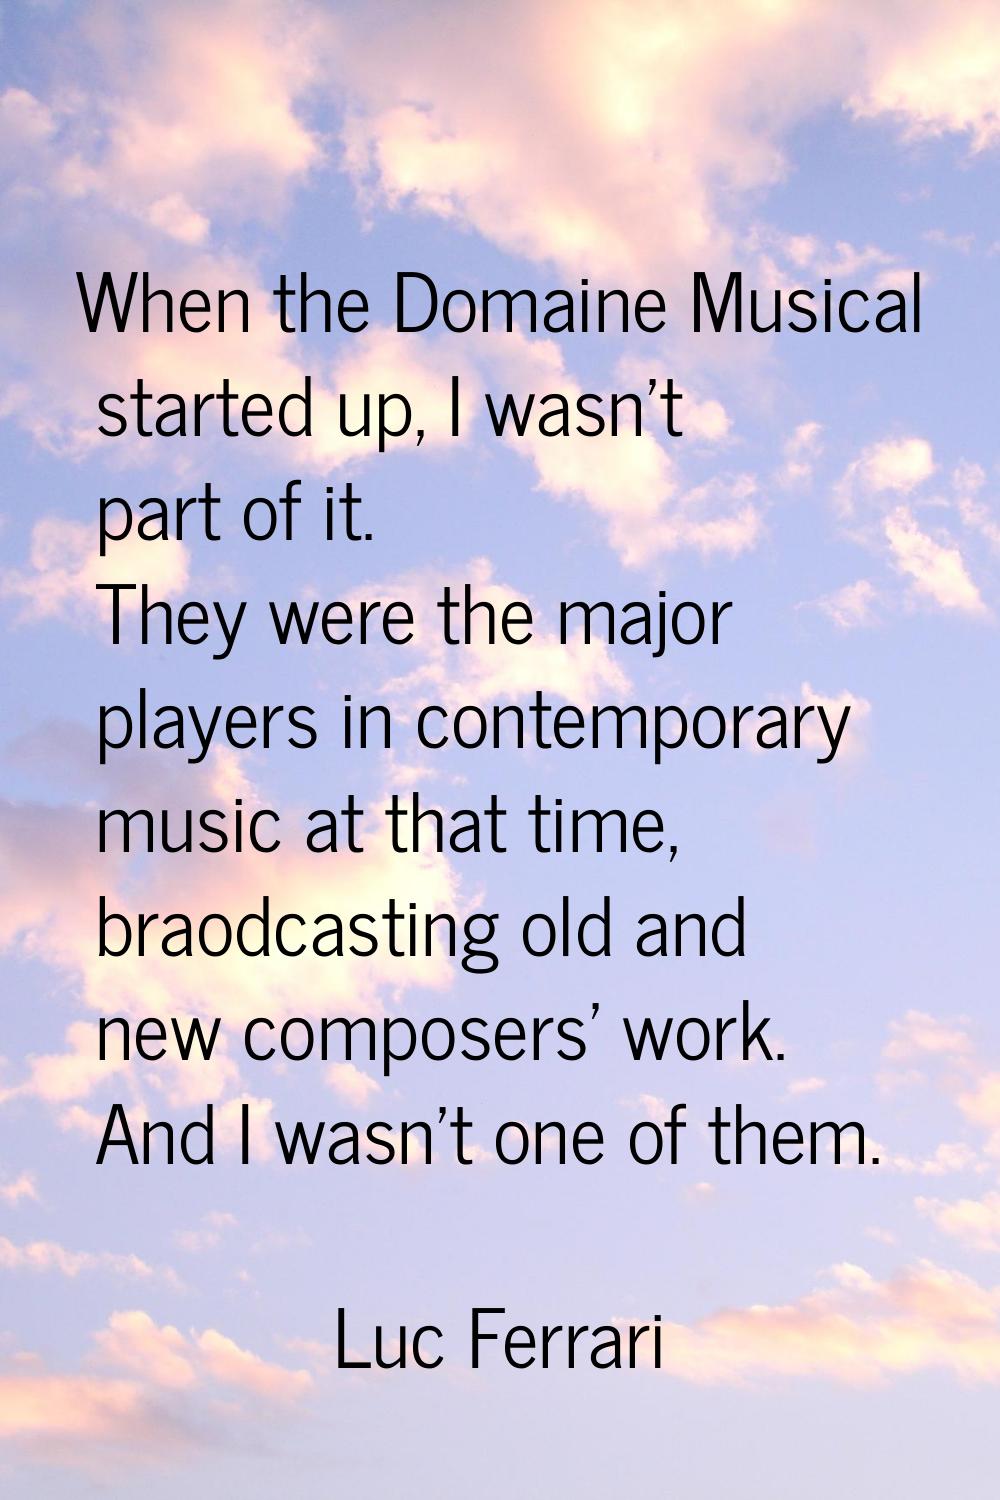 When the Domaine Musical started up, I wasn't part of it. They were the major players in contempora